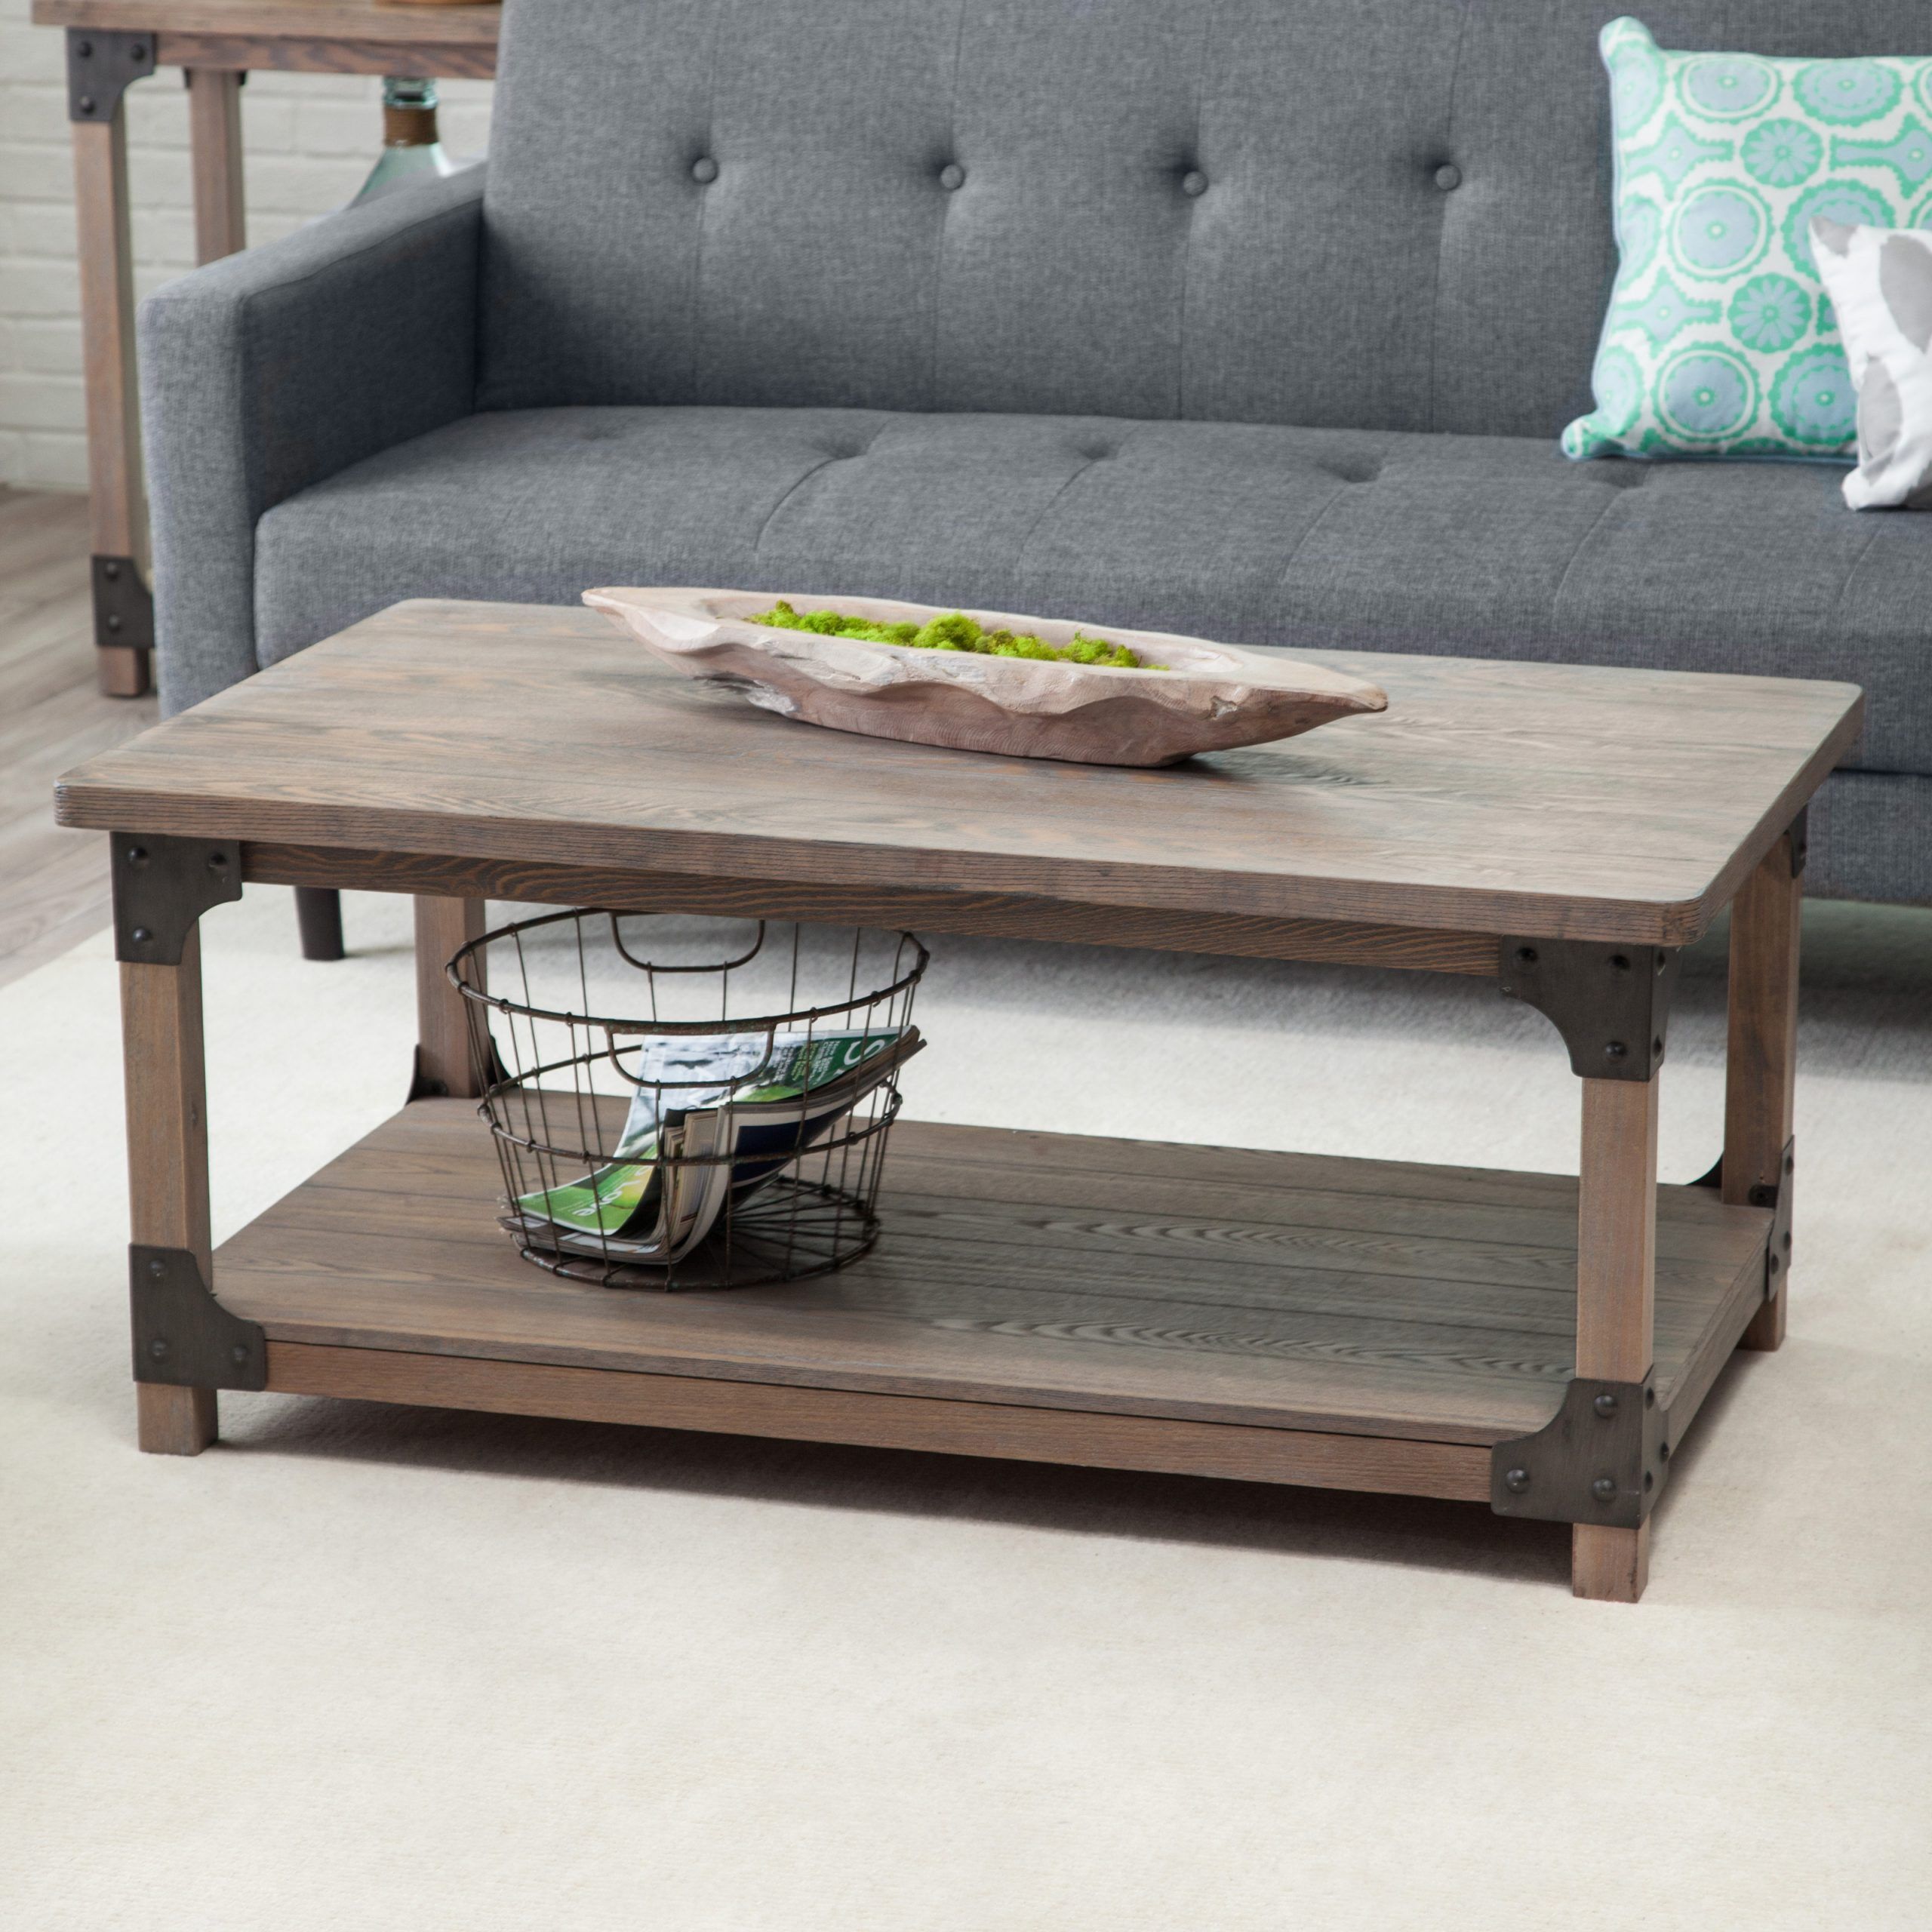 Belham Living Jamestown Rustic Coffee Table With Unique Intended For Gray Driftwood Storage Coffee Tables (View 7 of 15)